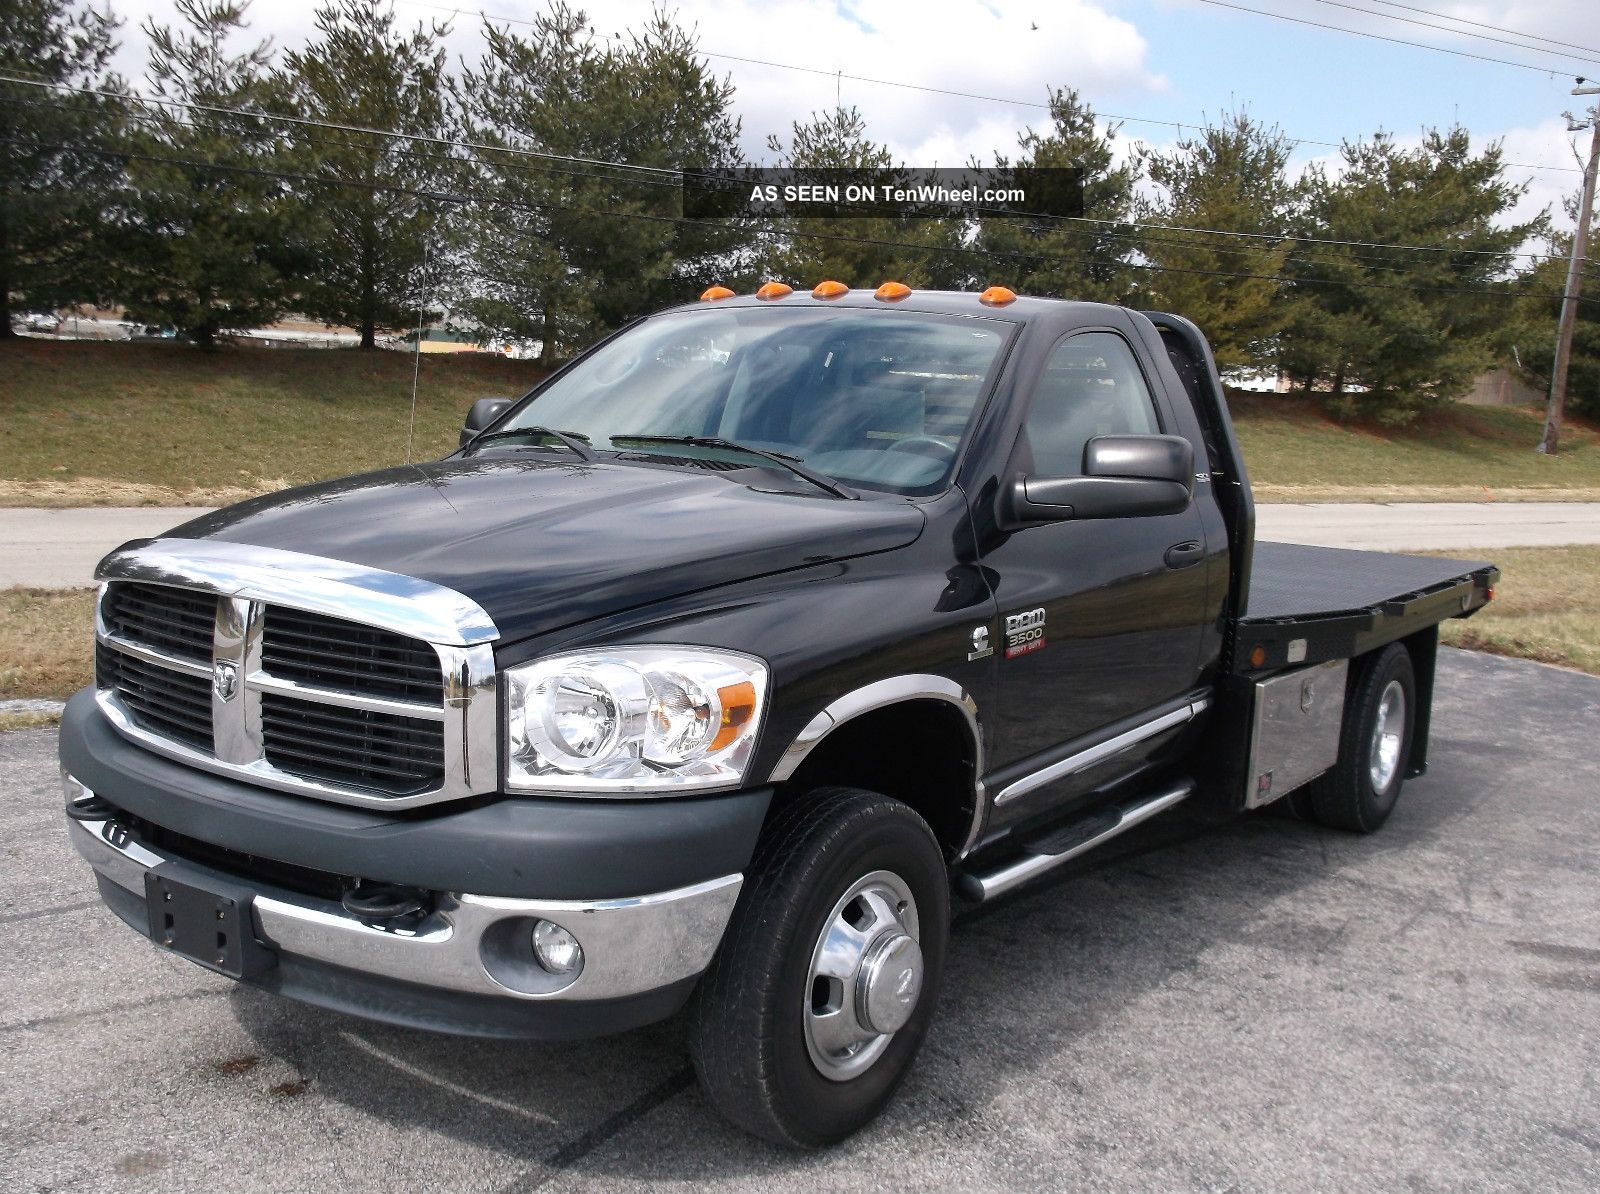 2007 Dodge Ram 3500 Exhaust Systems